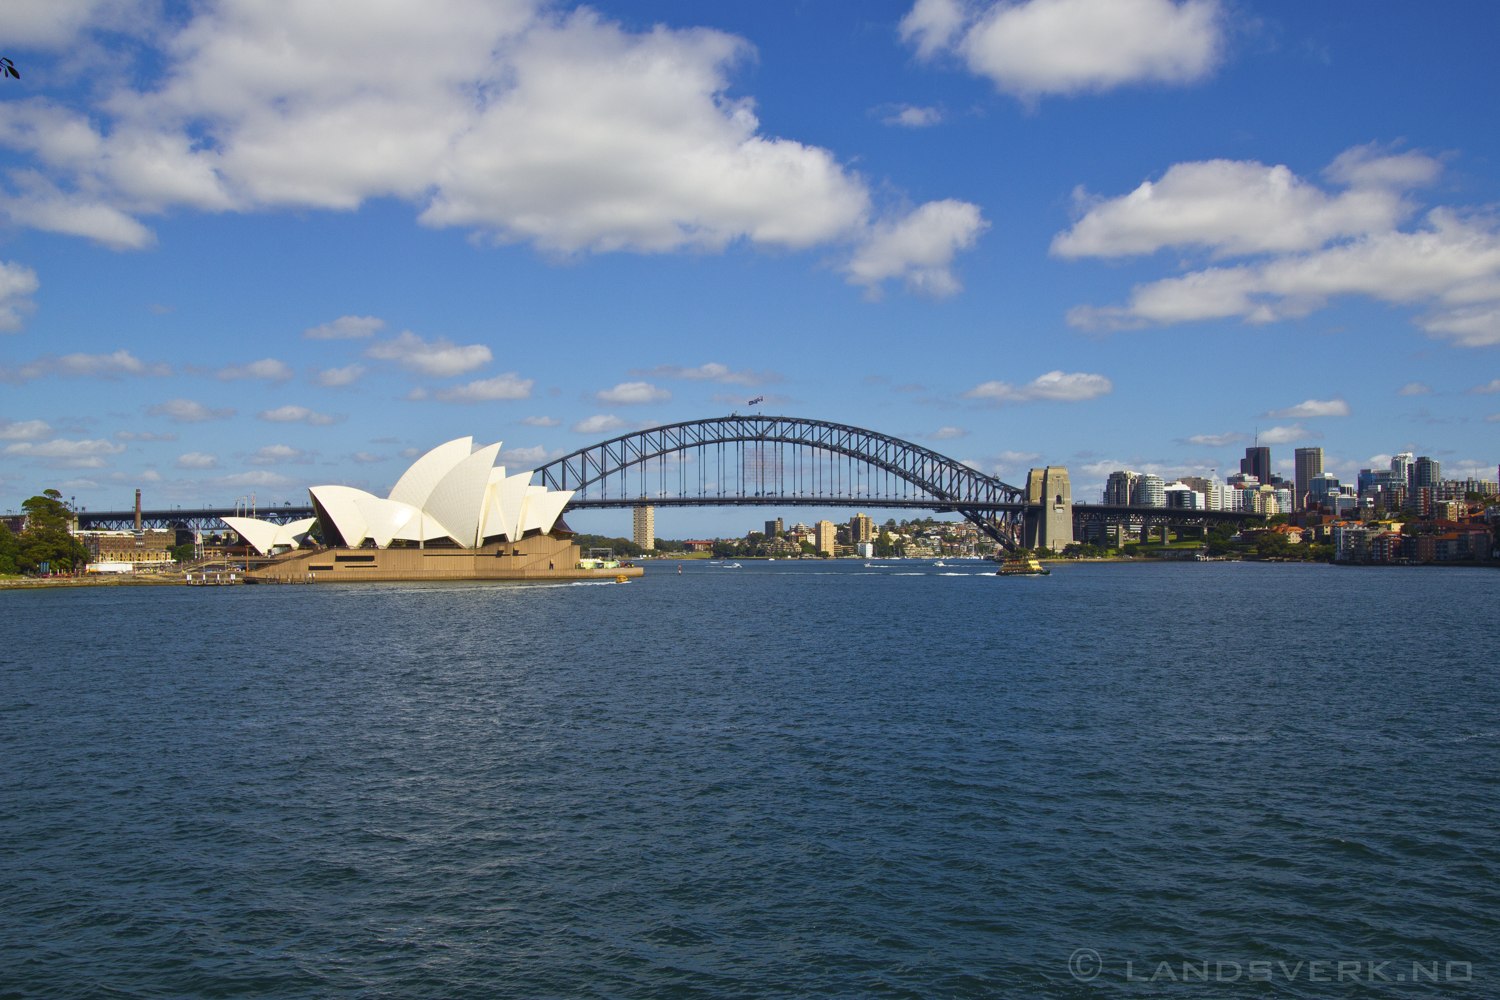 Sydney Harbor, New South Wales. 

(Canon EOS 550D / Sigma 18-50mm F2.8)